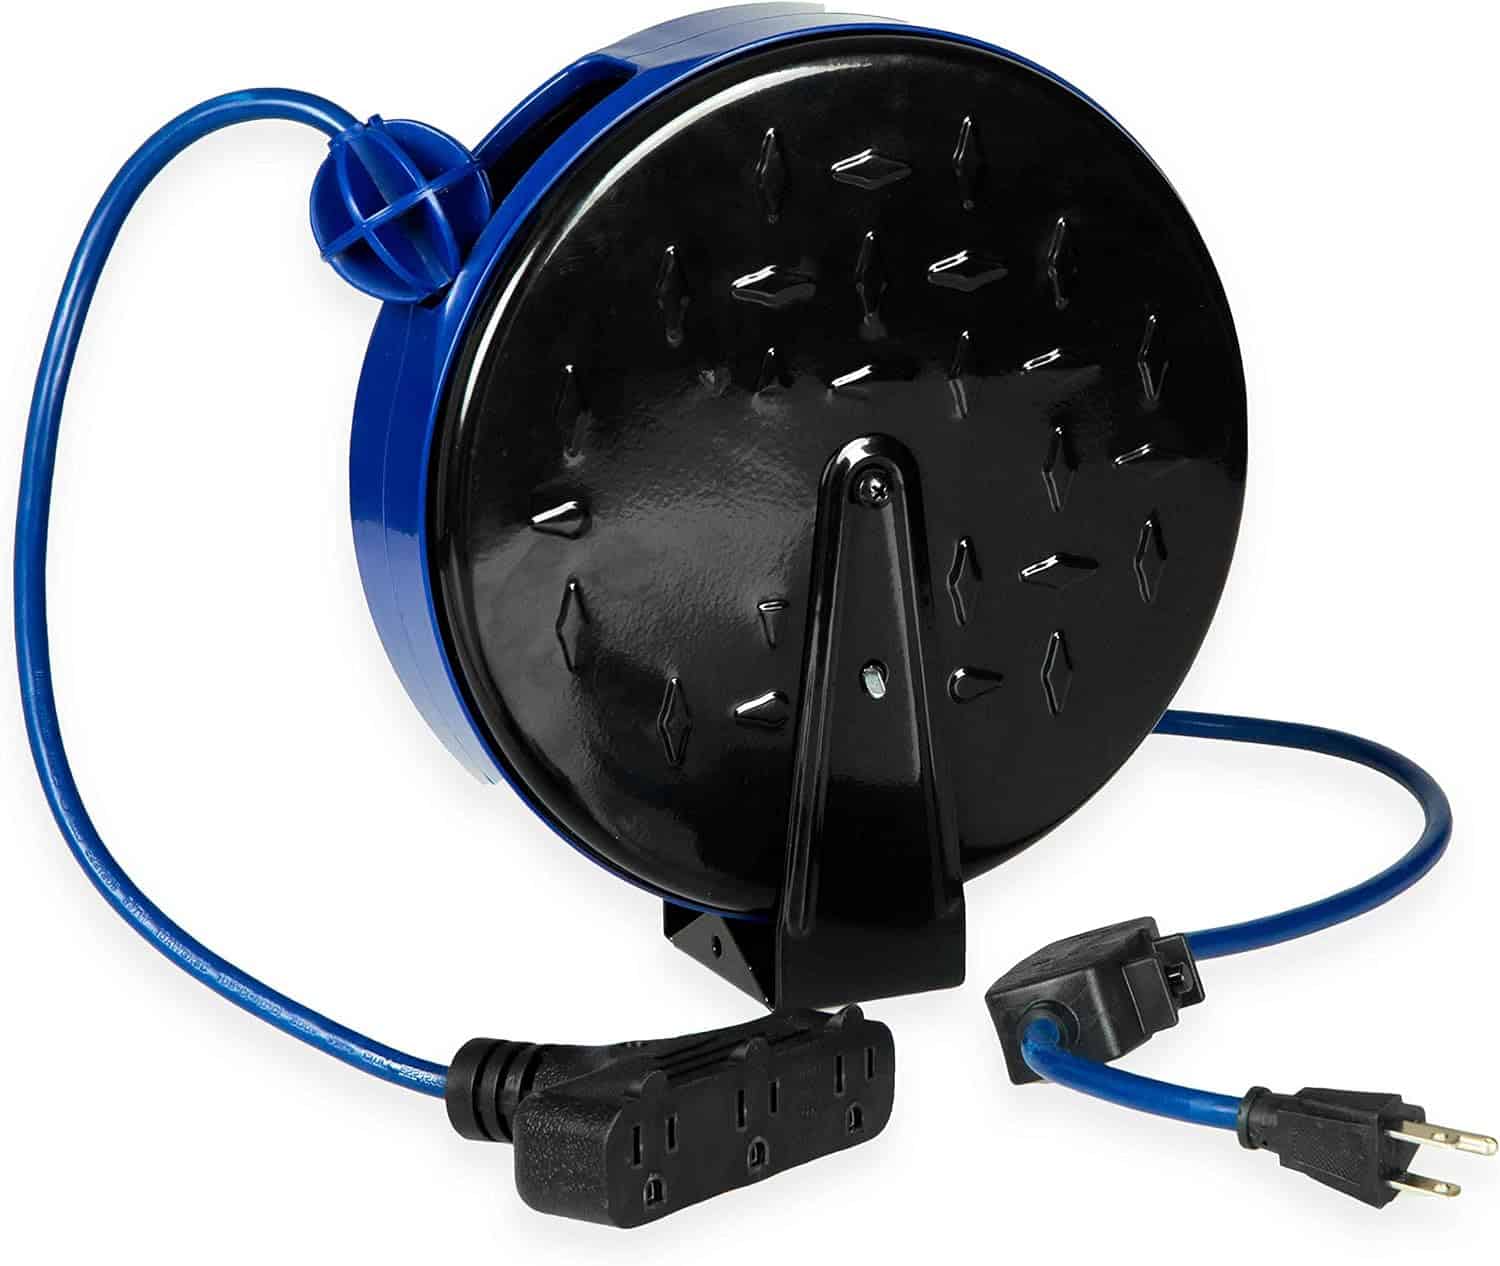 30Ft Retractable Extension Cord Reel with Breaker Switch & 3 Electrical Power Outlets – 16 3 SJTW Durable Blue Cable – Perfect for Hanging from Your Garage Ceiling 1